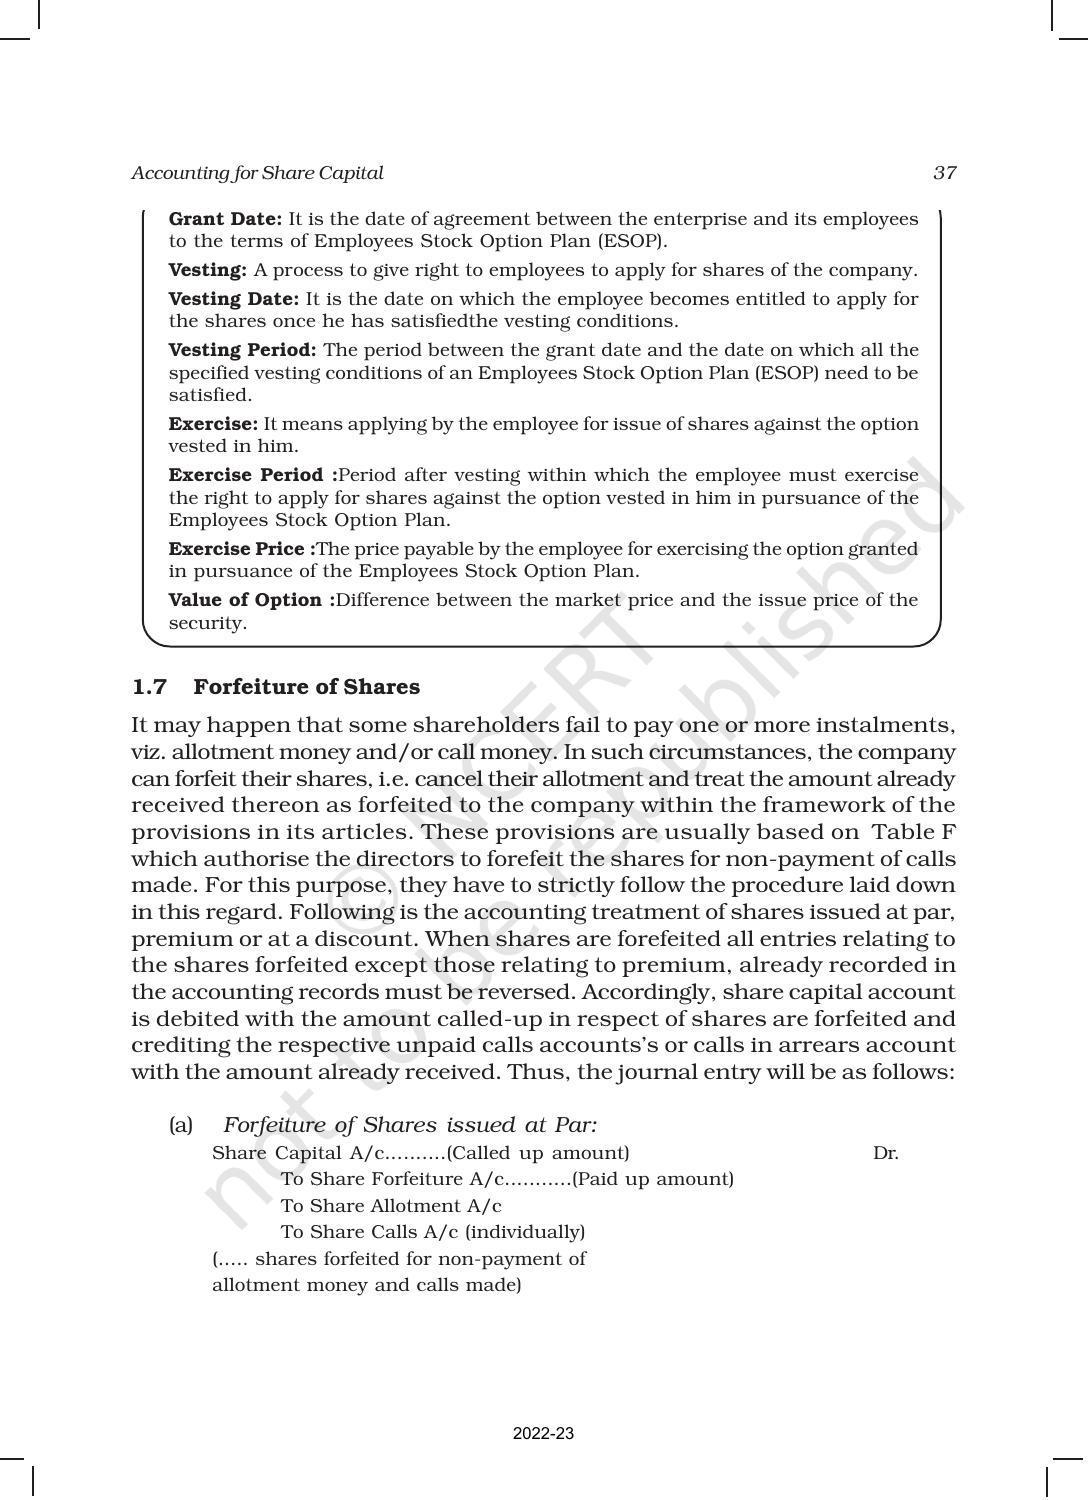 NCERT Book for Class 12 Accountancy Part II Chapter 1 Accounting for Share Capital - Page 37